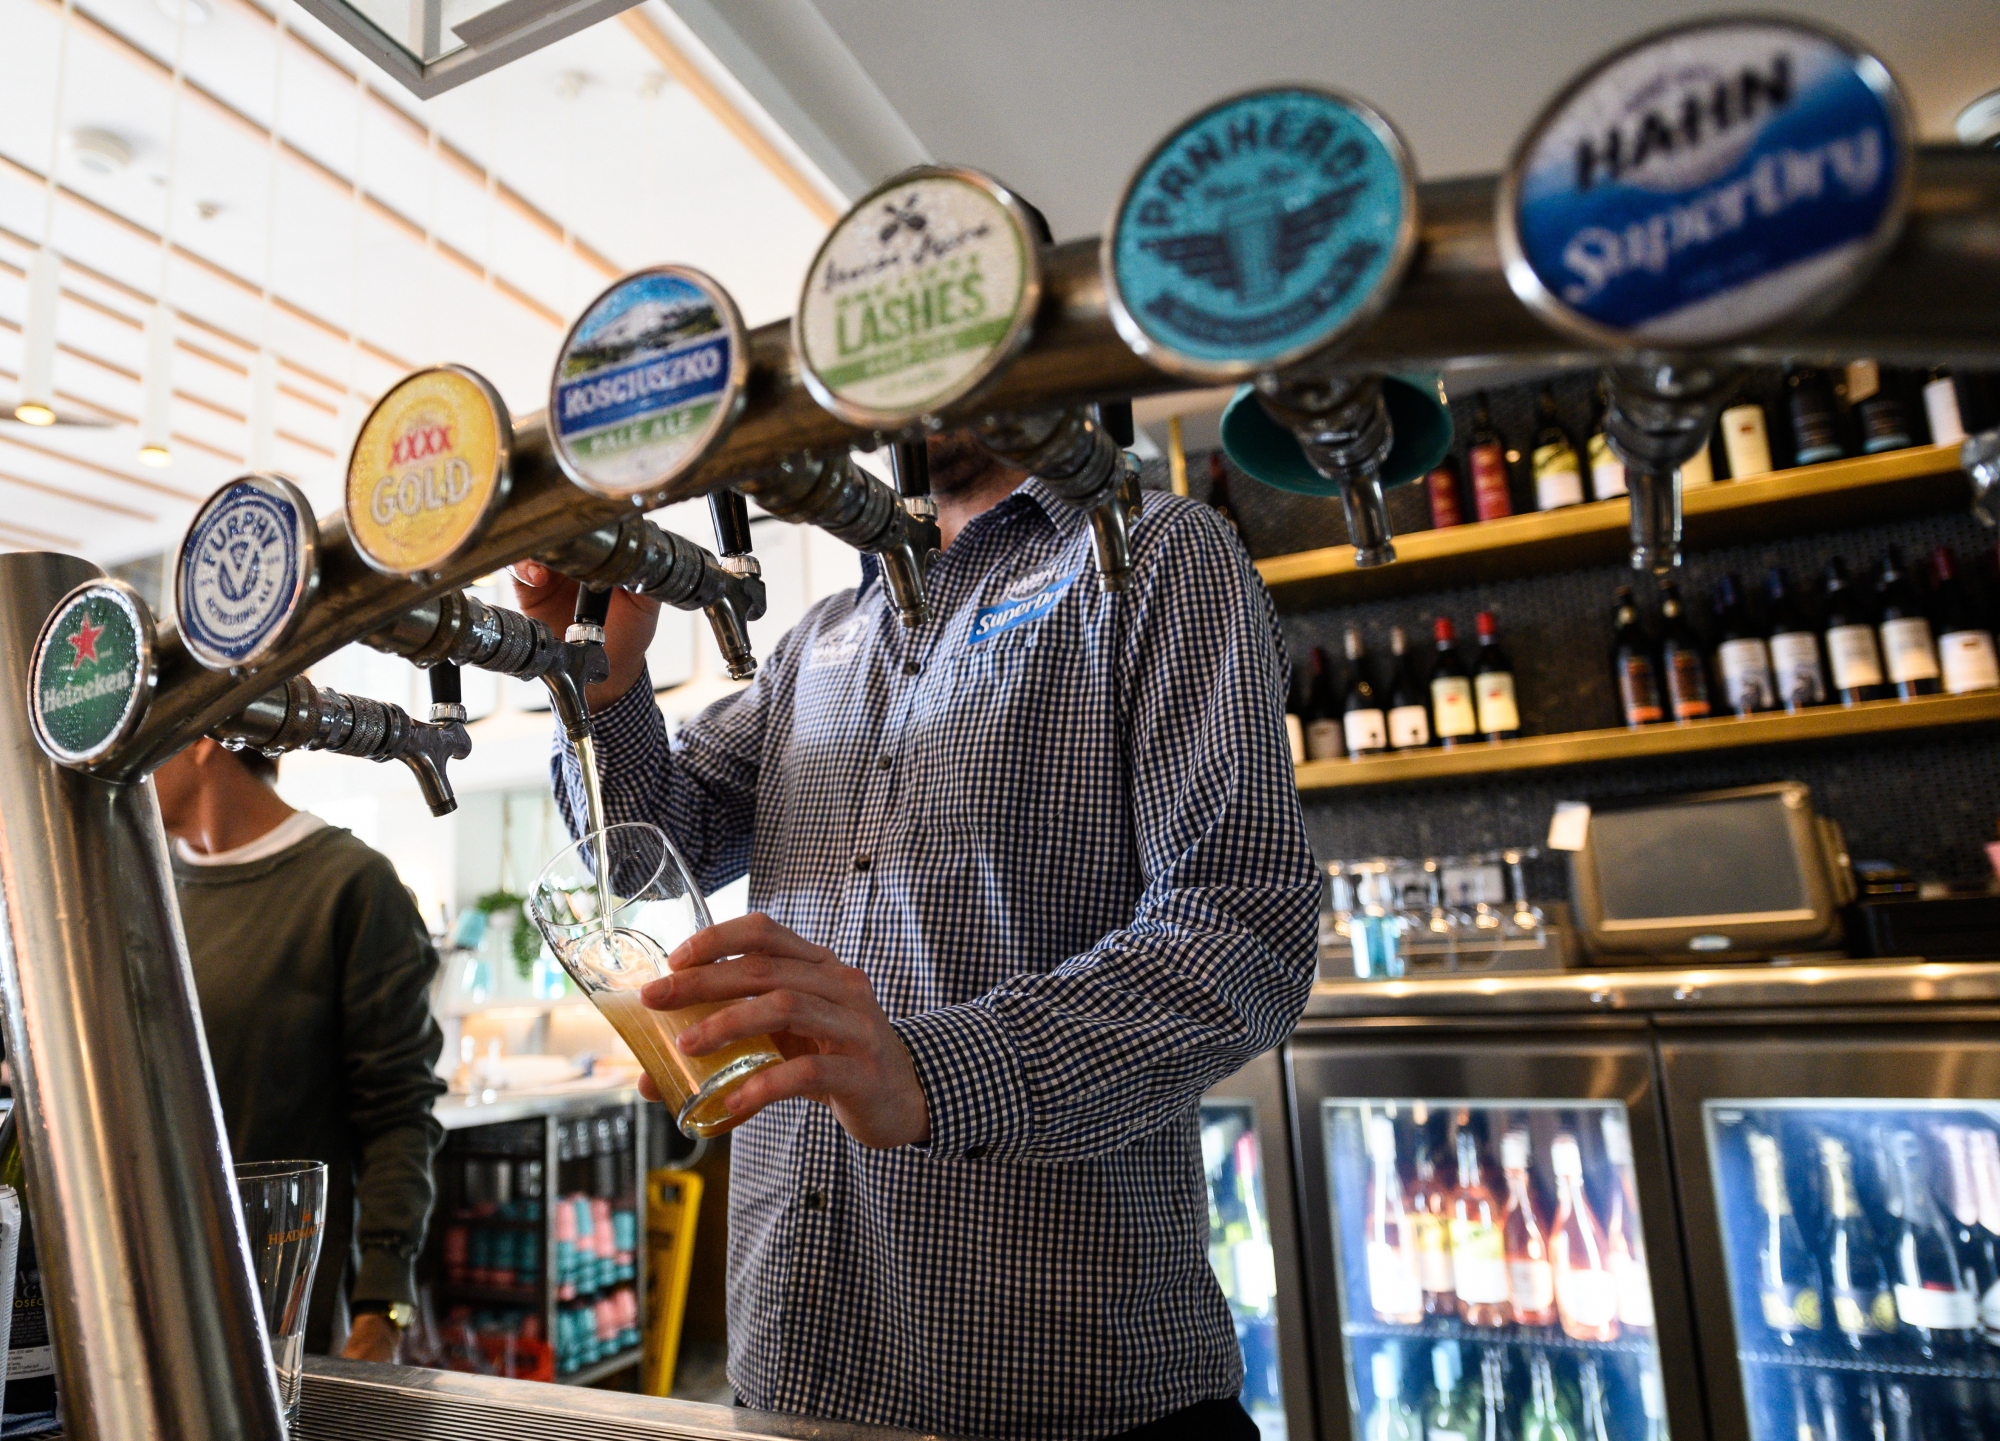 epa08457222 A barman pouring a beer at Bondi Beach, Sydney, Australia, 01 June 2020. Coronavirus restrictions are slowly being eased across Australia with states and territories at different stages on the roadmap to reopen the nation.  EPA/JAMES GOURLEY  AUSTRALIA AND NEW ZEALAND OUT
ArcInfo